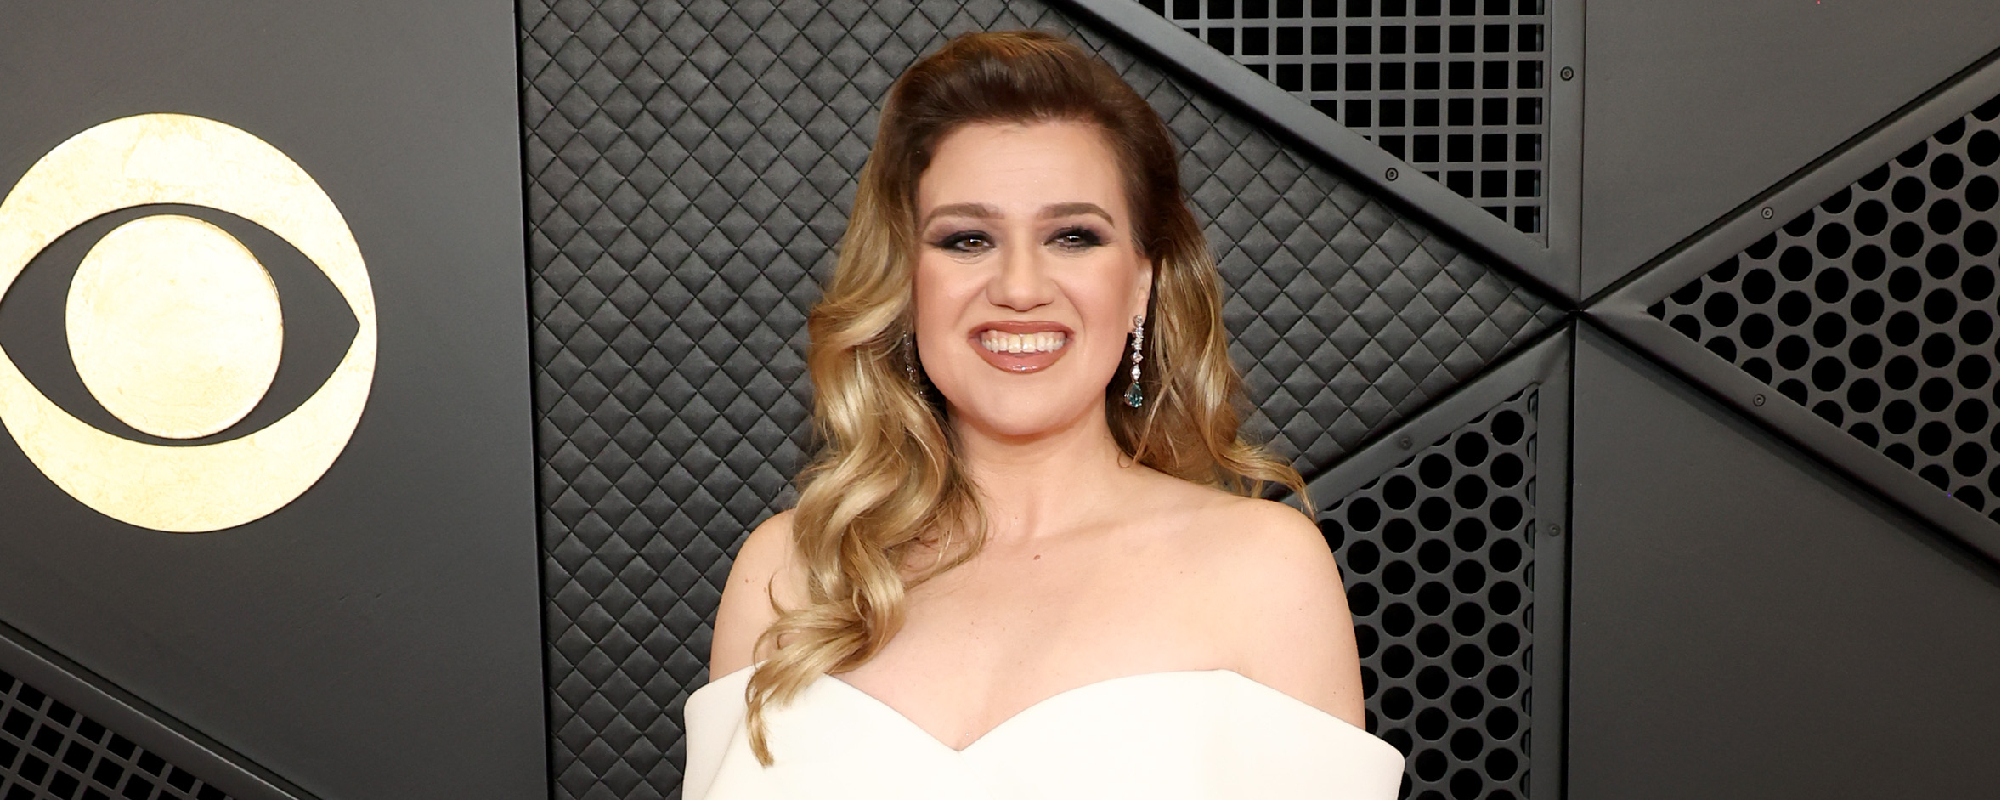 Kelly Clarkson Proves Her Wide Range With Moving Cover of Billie Eilish’s ‘What Was I Made For?’